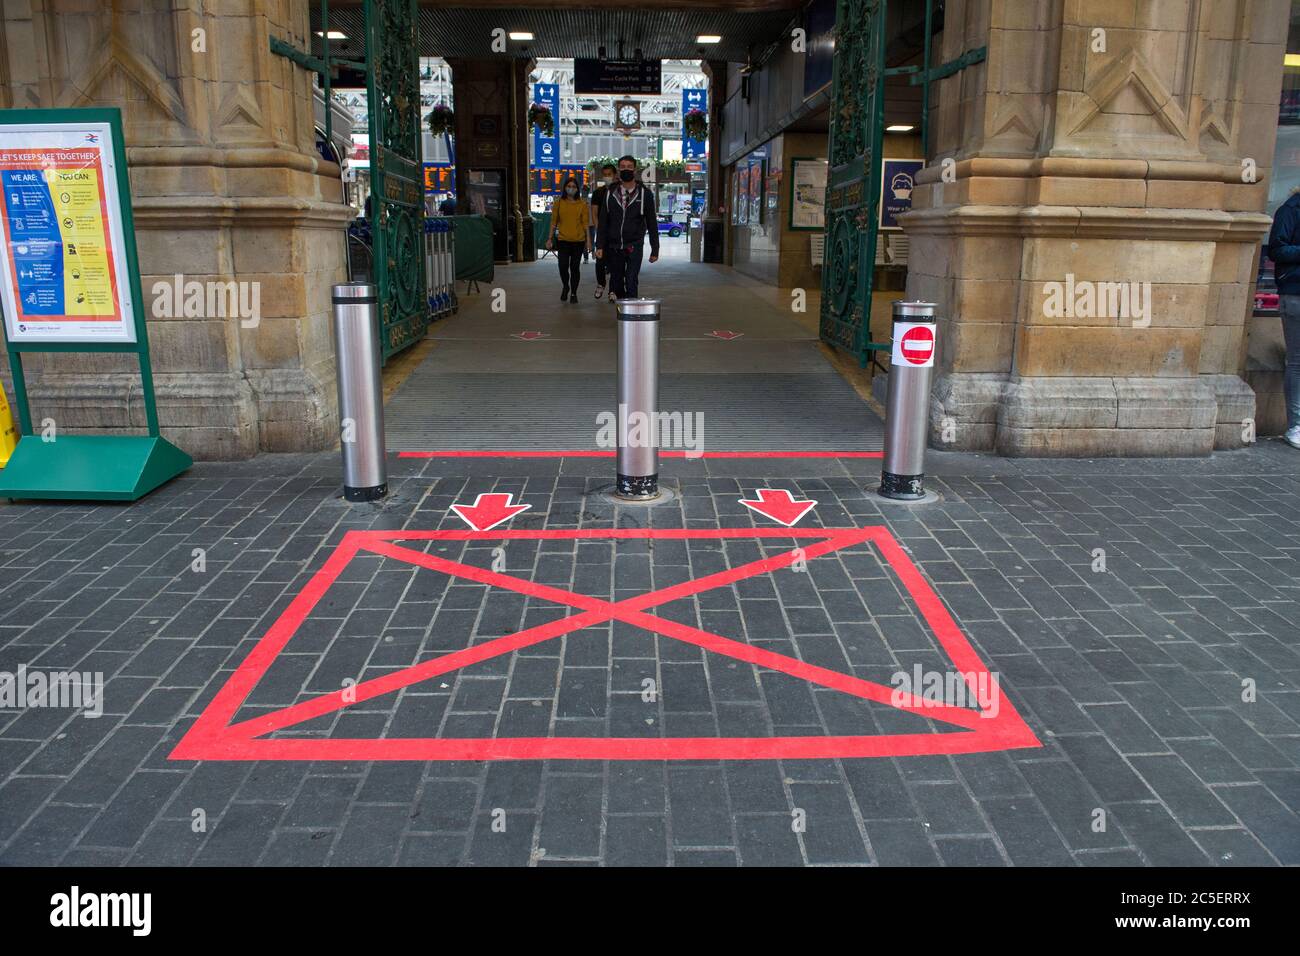 Glasgow, Scotland, UK. 2nd July, 2020. Pictured: Gordon Street entrance to Central Station in Glasgow city centre. Hand sanitising stations and face masks are offered to all passengers entering the station. Face coverings are mandatory on all public transport in Scotland. Today Nicola Sturgeon announced mandatory face coverings to be worn in all shops from 10th July next week in a bid to completely stop the spread of coronavirus (COVID19). Credit: Colin Fisher/Alamy Live News Stock Photo